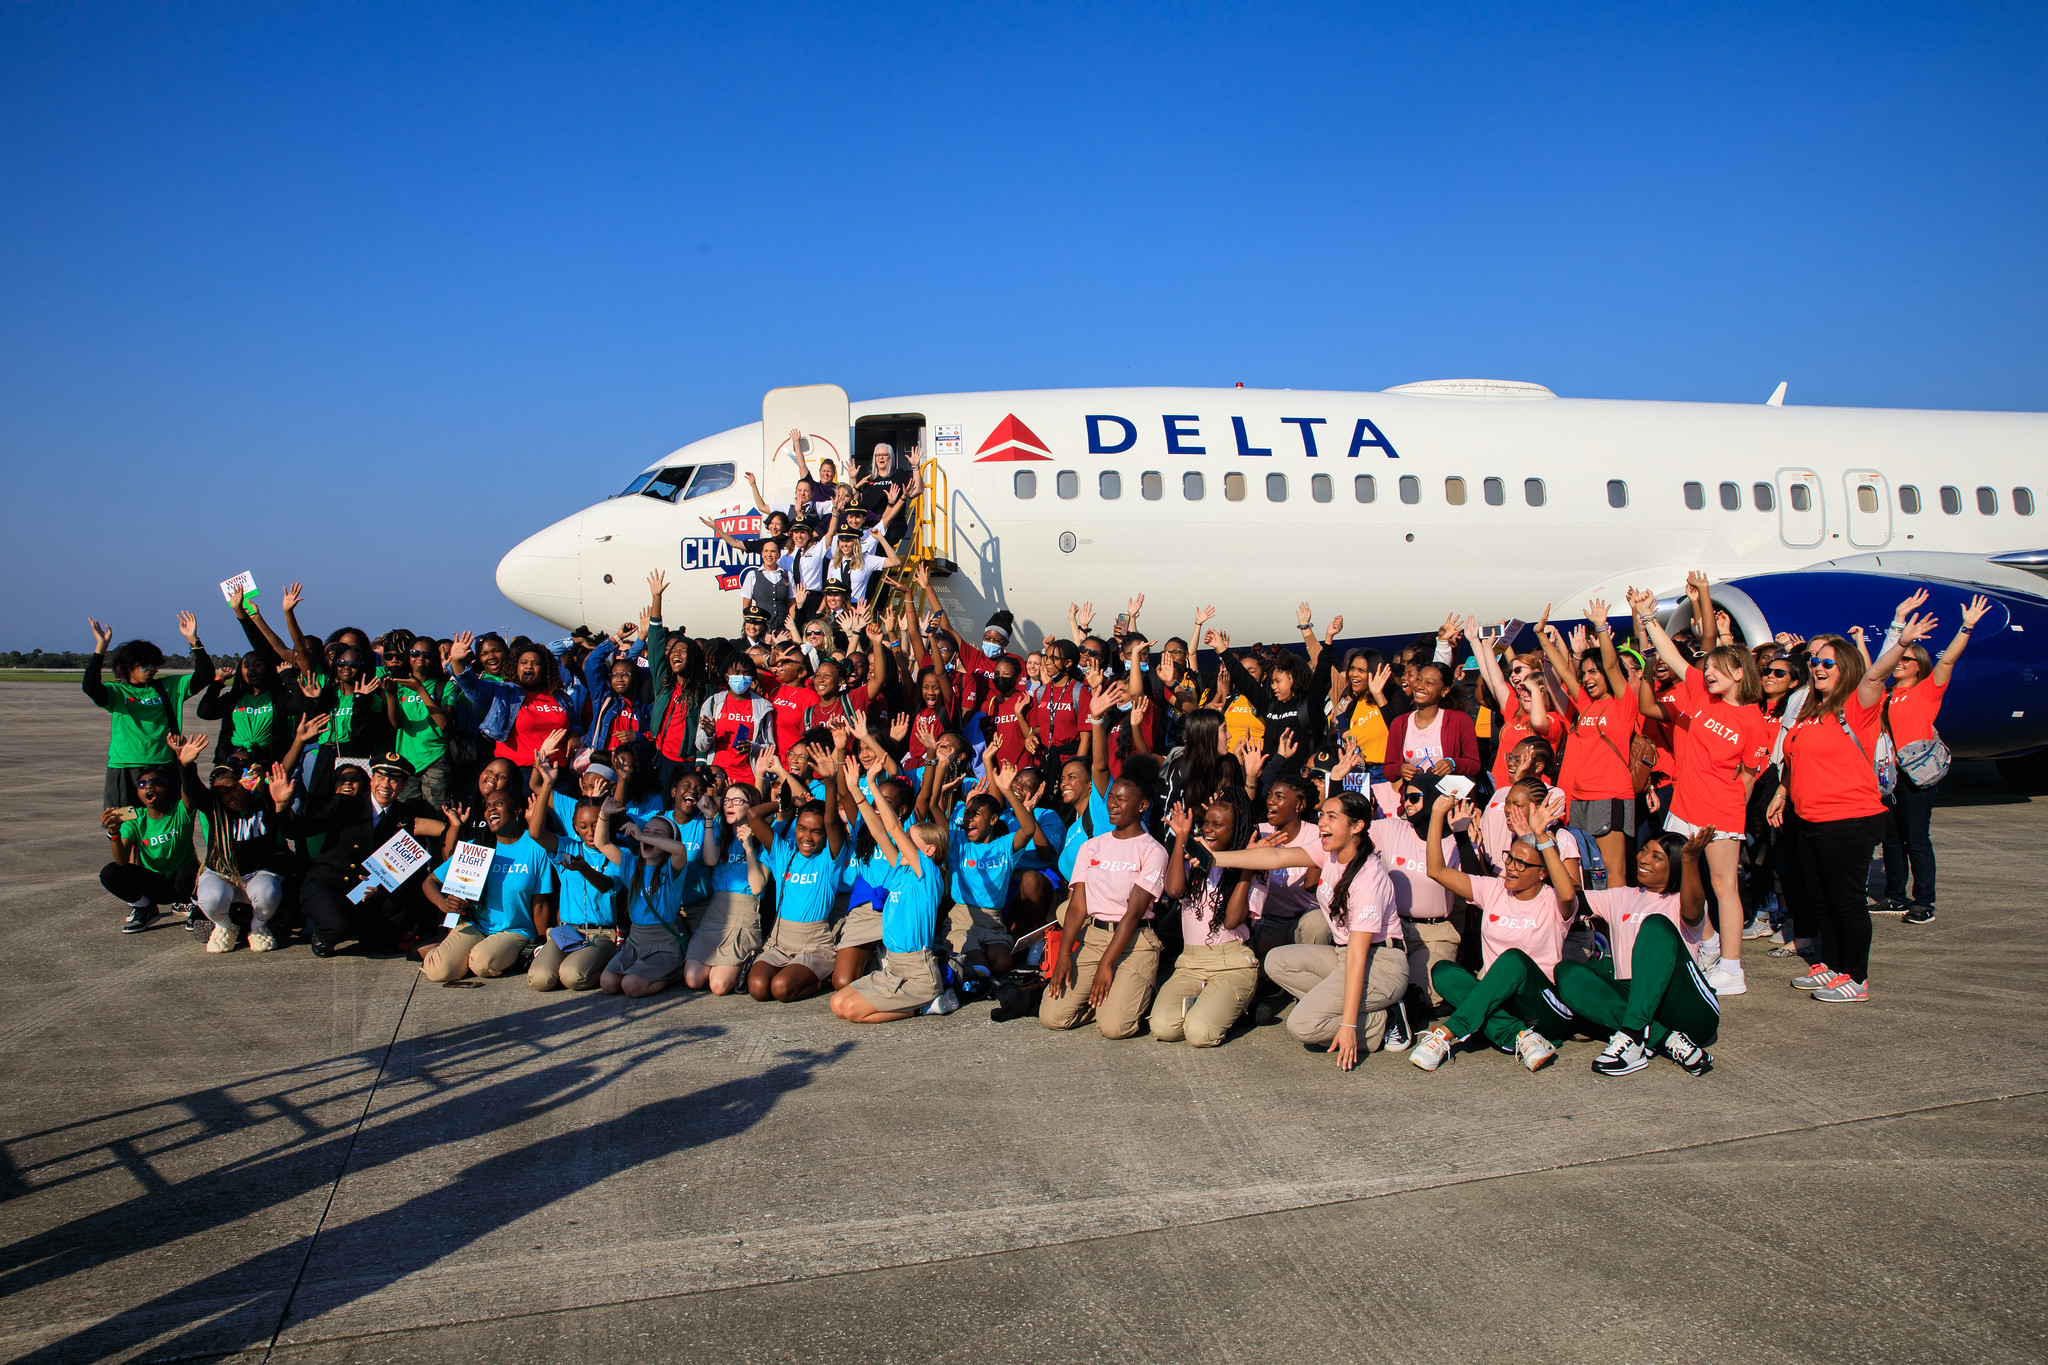 A group of all-female students is photographed in front of a Delta airplane at NASA's Kennedy Space Center in Florida following their arrival from Atlanta, Georgia.